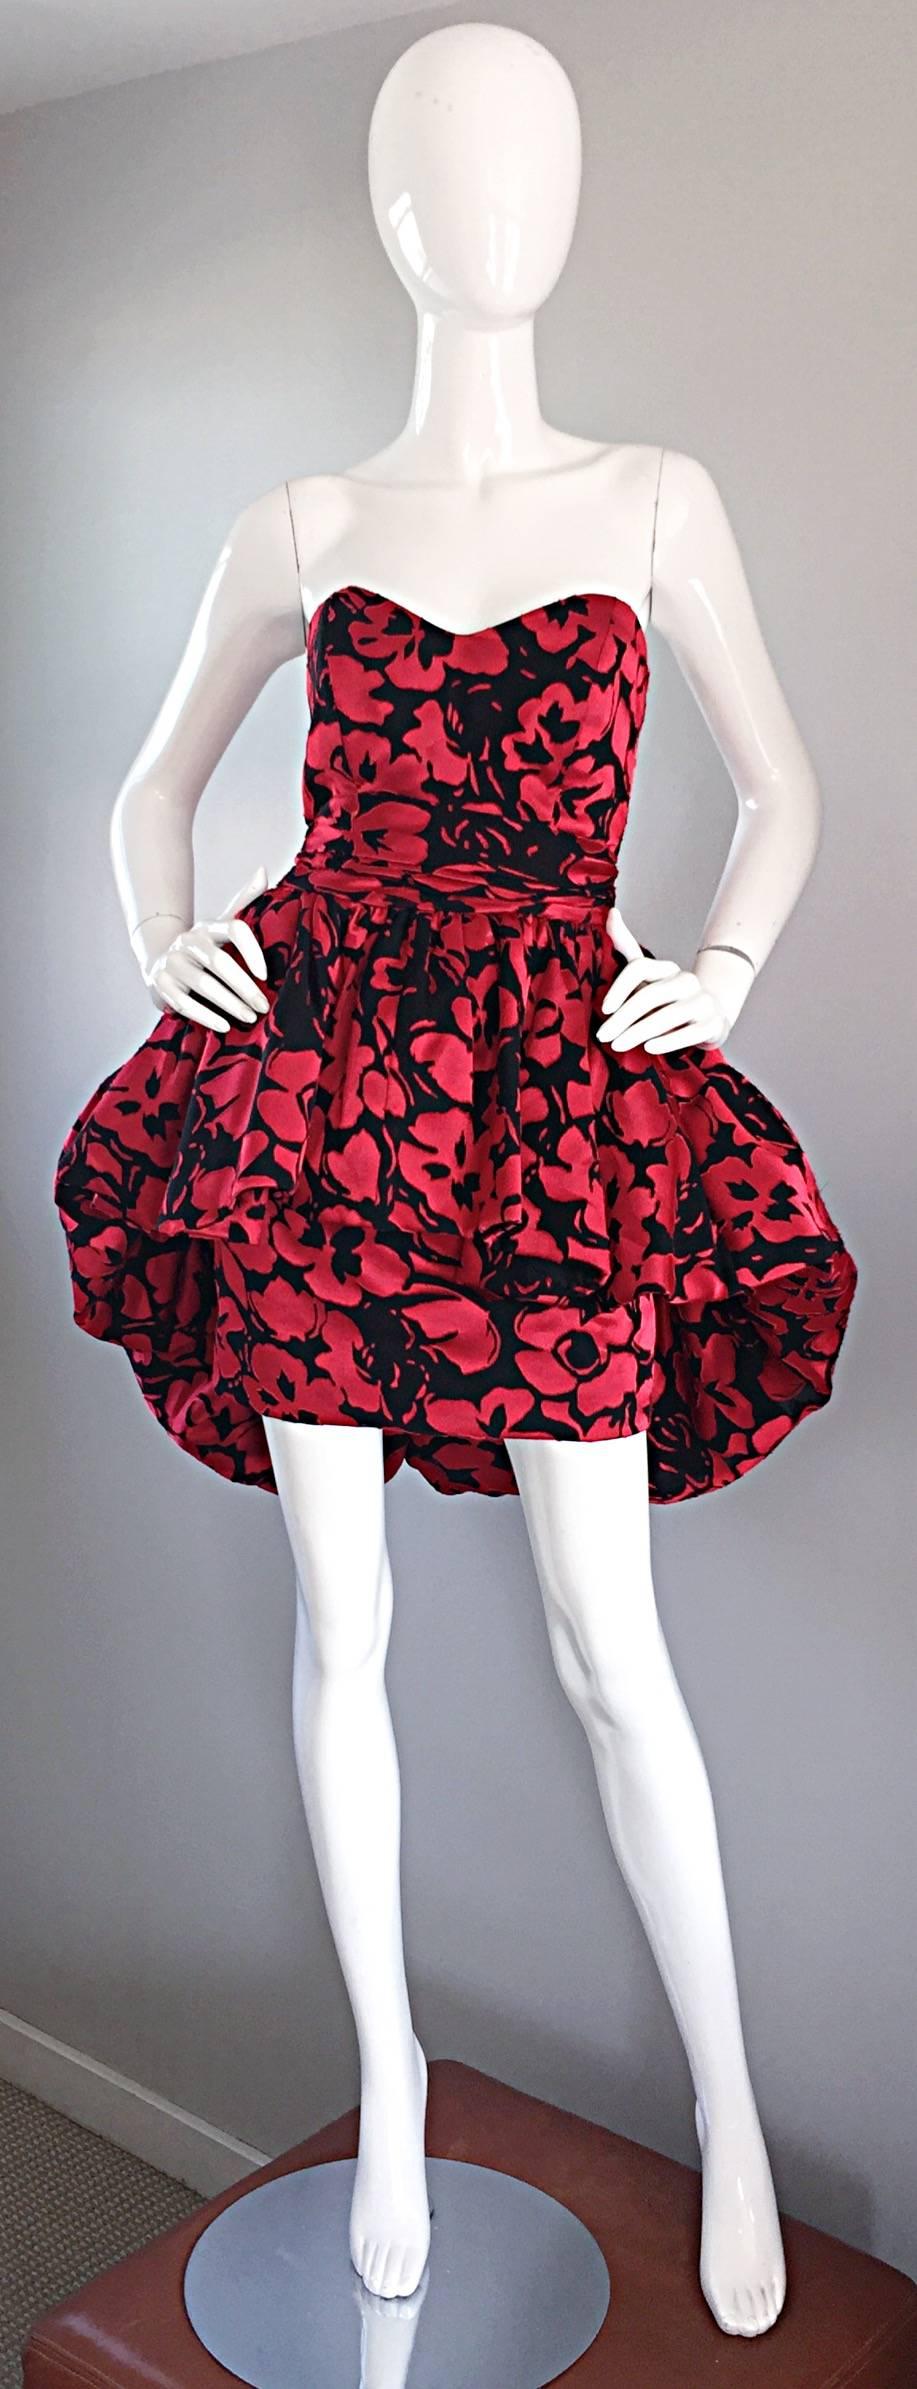 Sensational vintage CHRISTIAN LACROIX Couture black and red silk strapless cocktail mini dress! Features a fitted boned bodice. Flattering fitted mini skirt with a hand-sewn Avant Garde oversized peplum. Mostly hand-sewn with heavy attention to